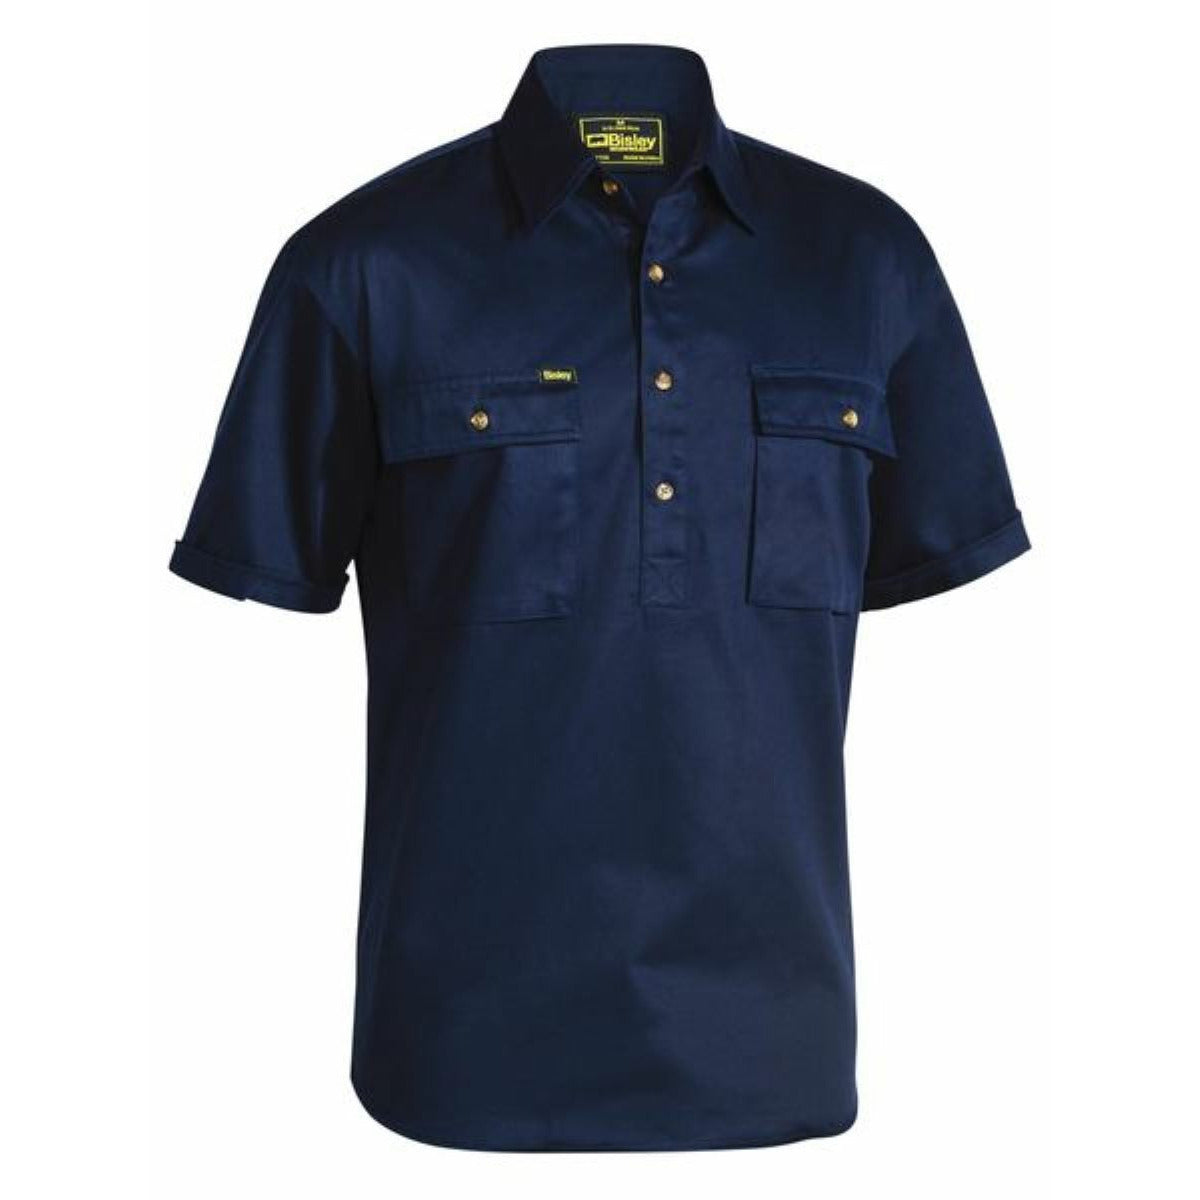 Bisley Closed Front Cotton Drill Shirt